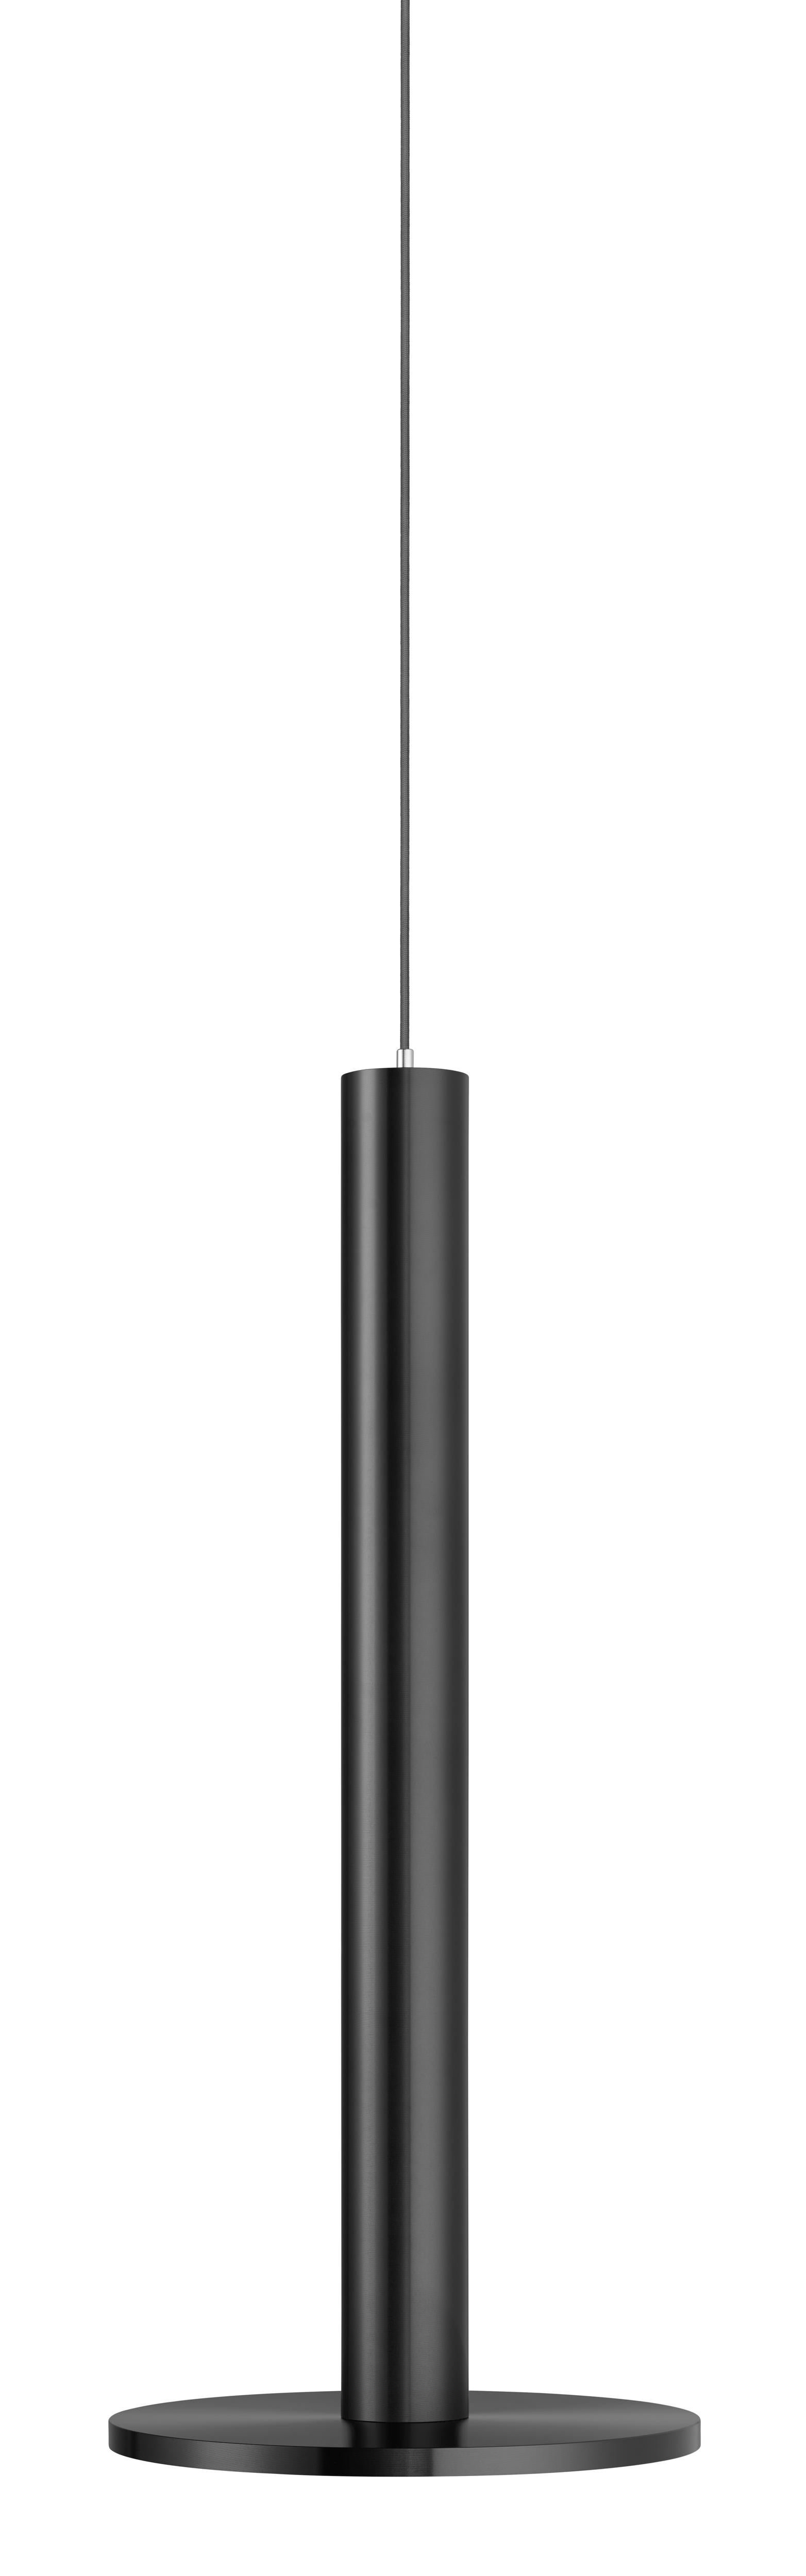 The minimalist Cielo pendant Series is expanding to include the stunning new Cielo XL, a taller and slimmer design offering premium machined aluminium finishes and boasting a warm and brilliant 1200 lumen output. Cielo XL is scaled perfectly for